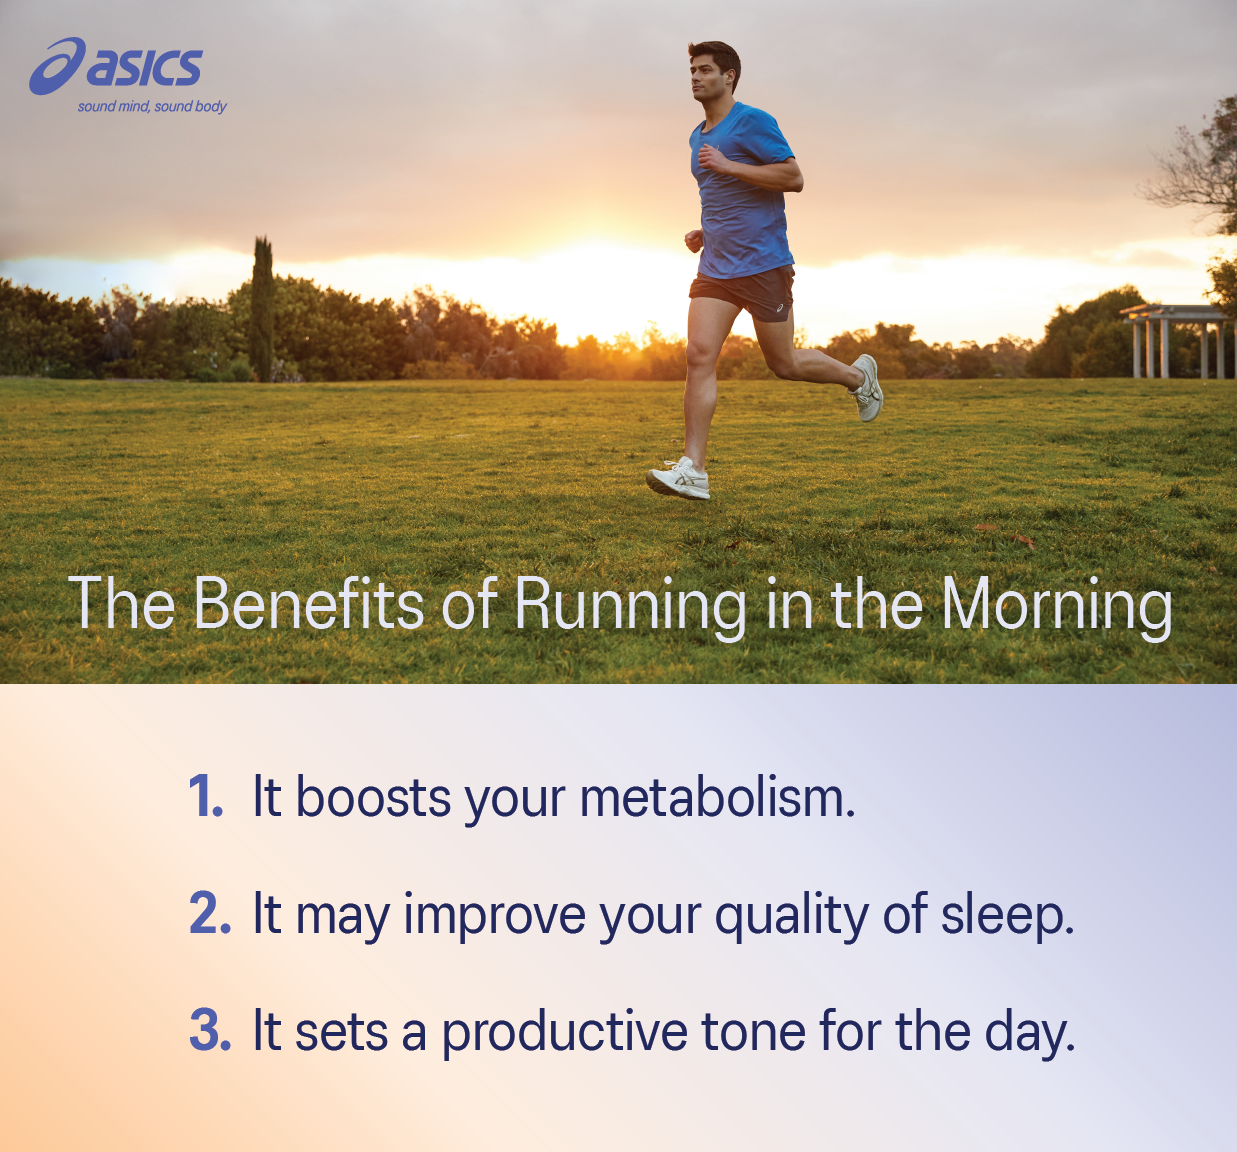 How to Jog in the Morning